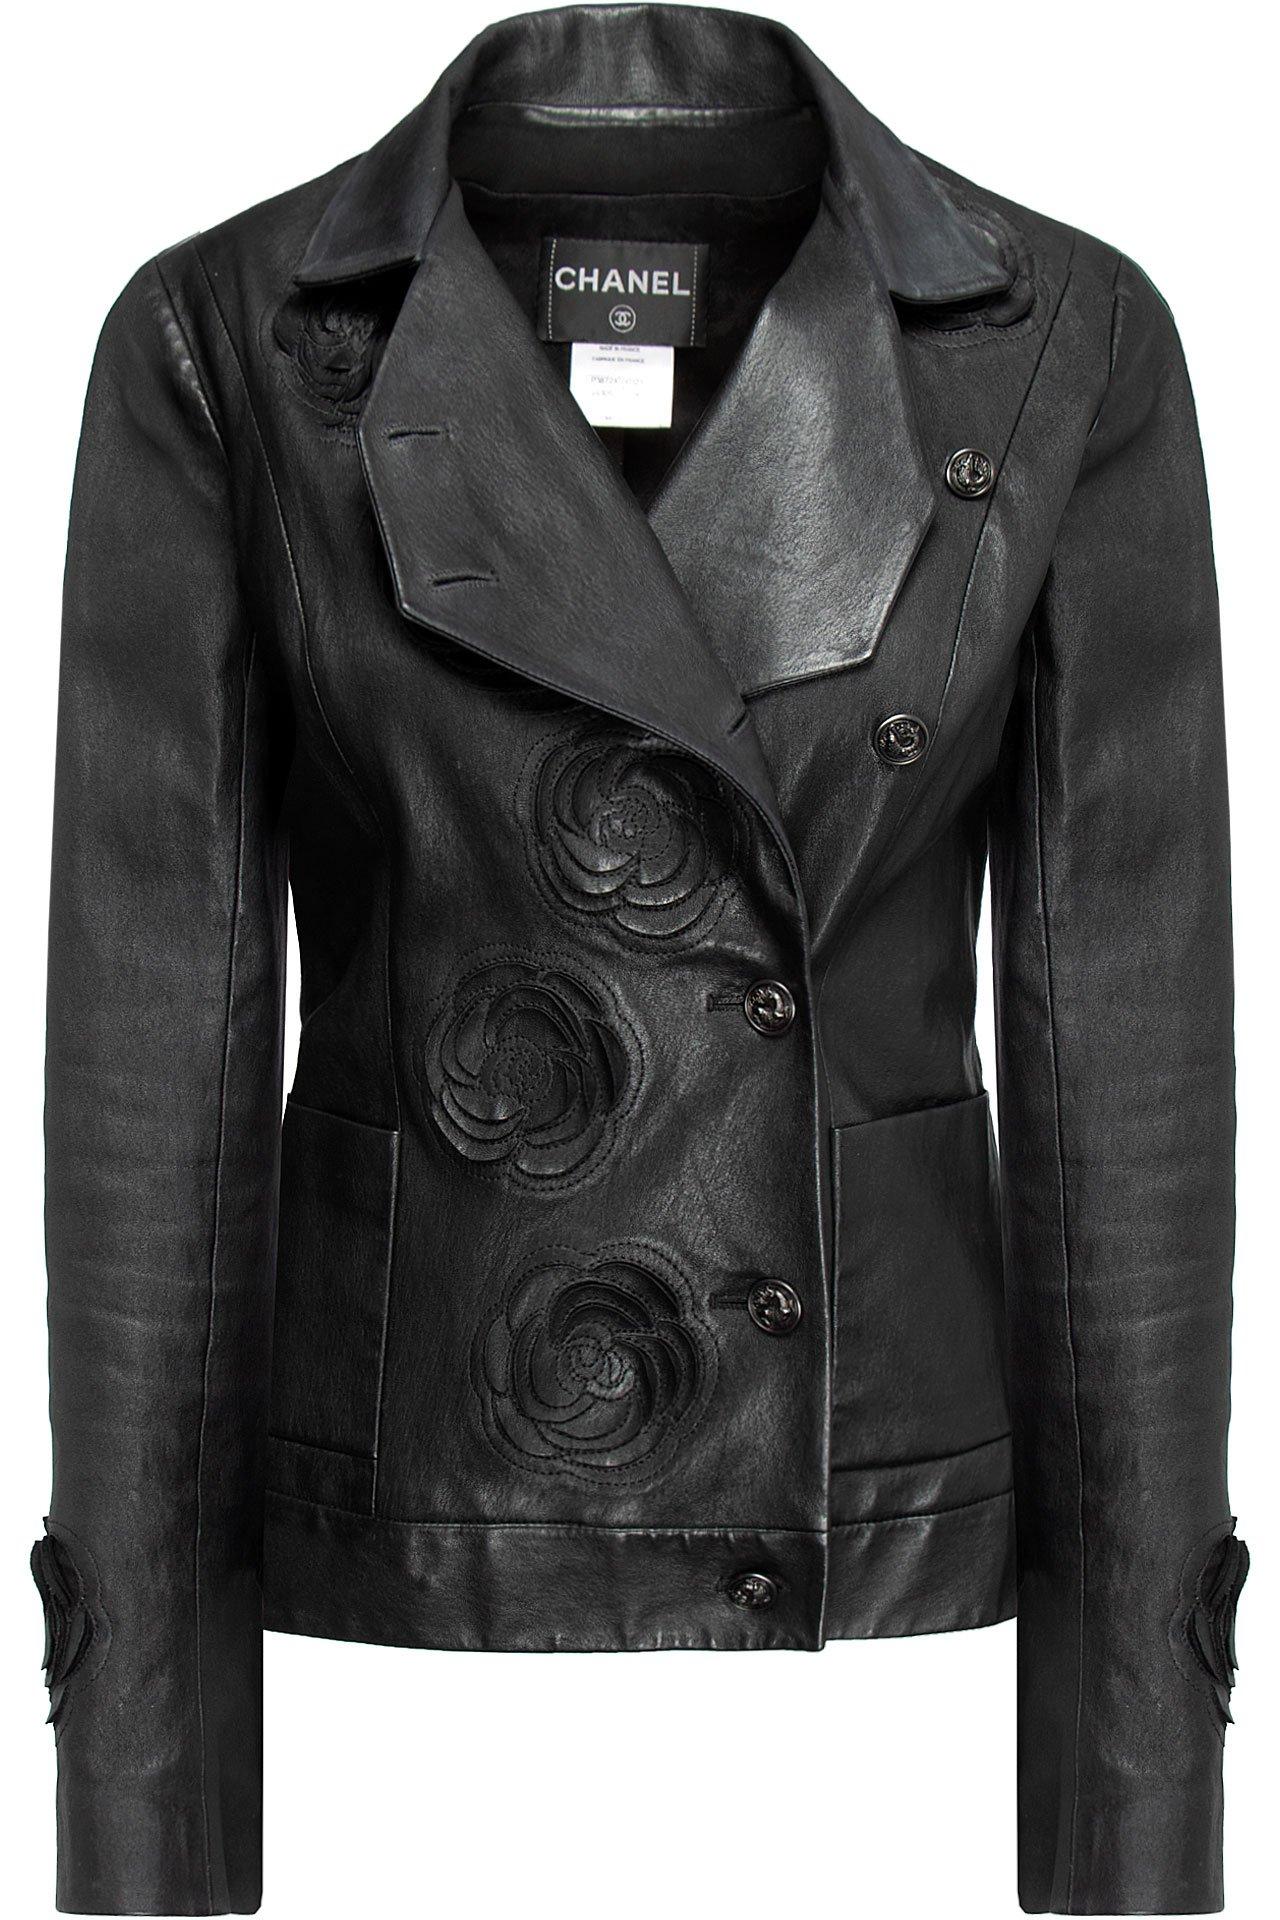 Stunning Chanel black leather jacket with camellias applique from Runway of Paris / SHANGHAI Collection. Retail price over 12,000€.
- CC logo Dragon buttons
- full sils lining
Size mark 36 fr. Excellent condition, missing one buttons (the upper one,